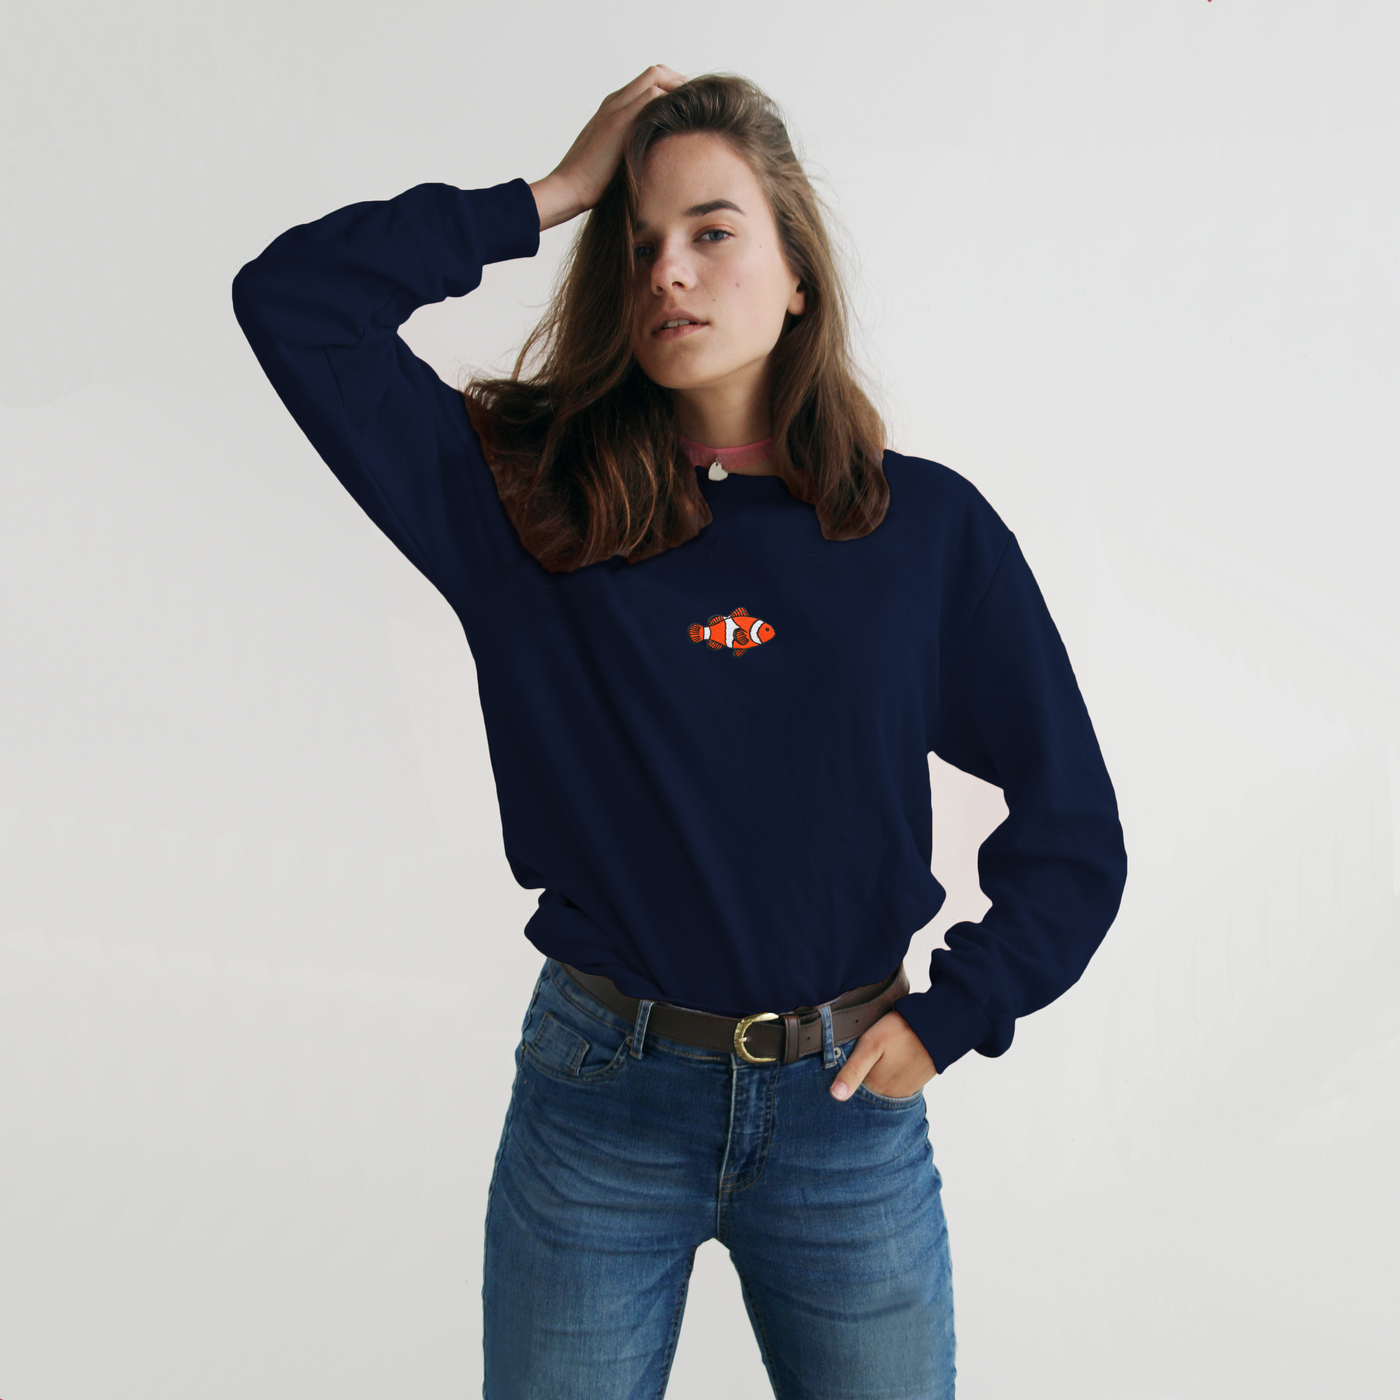 Bobby's Planet Women's Embroidered Clownfish Long Sleeve Shirt from Seven Seas Fish Animals Collection in Navy Color#color_navy